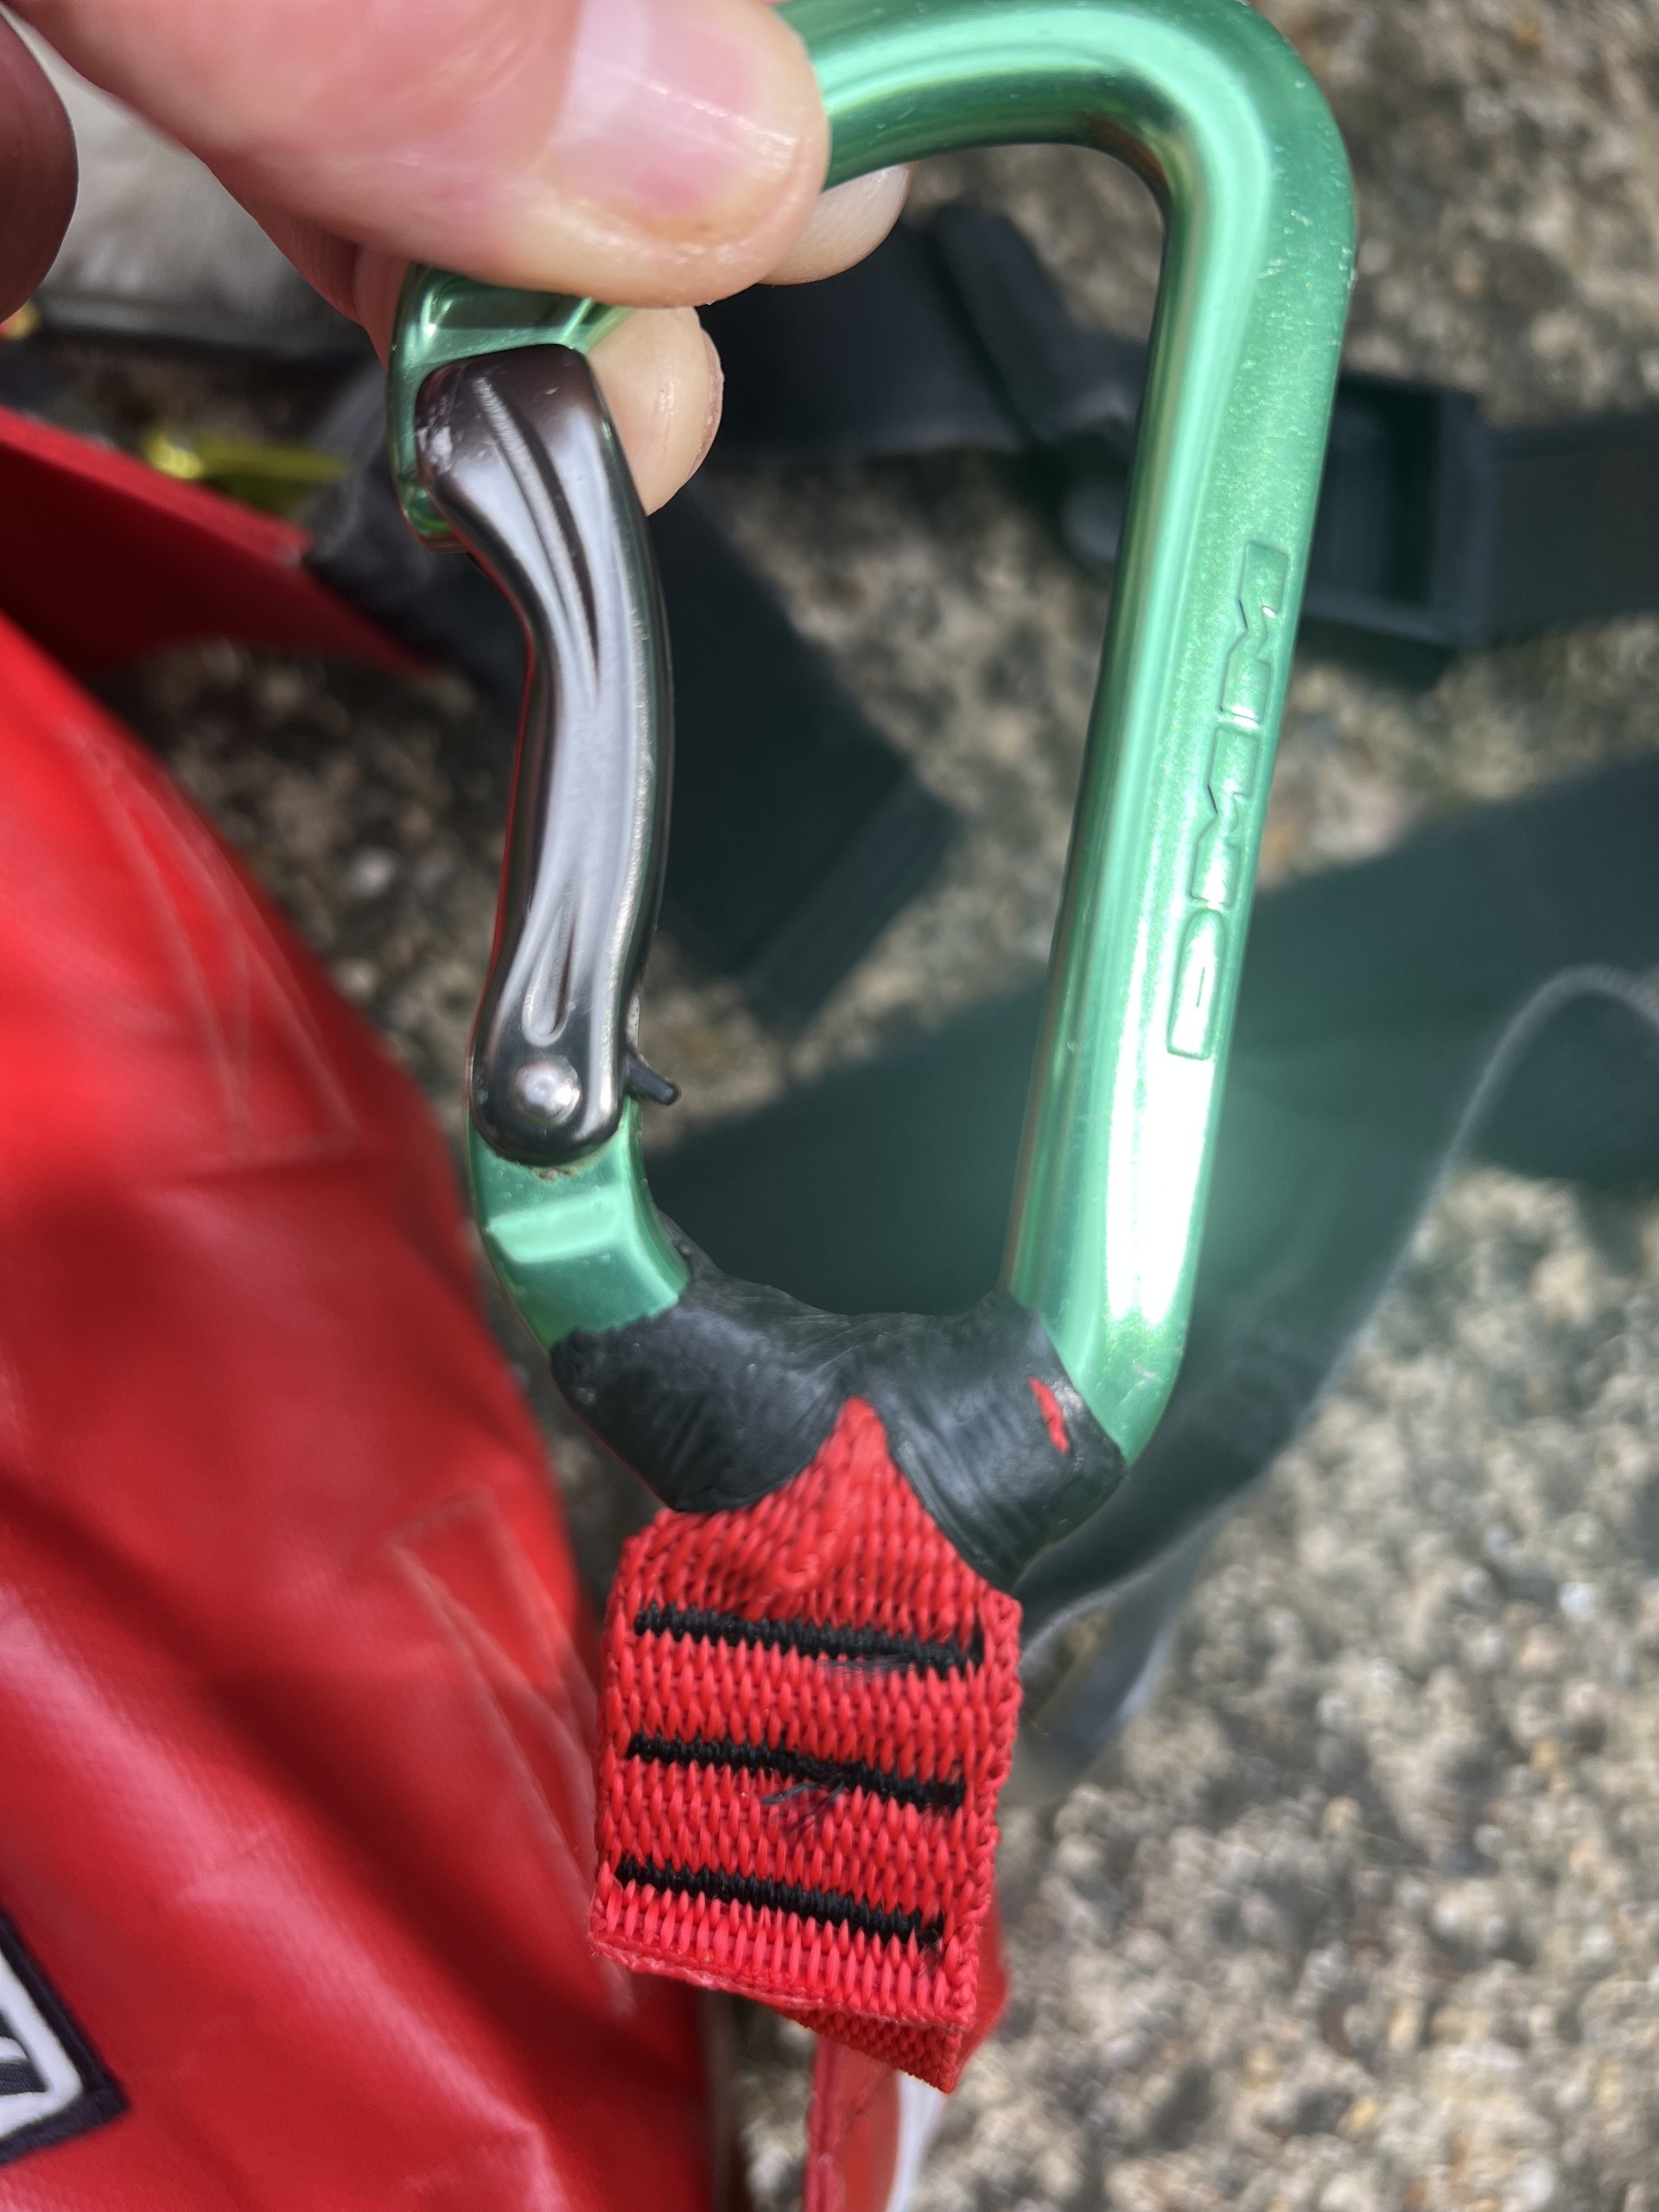 Carabiners need replacing on this tow system.